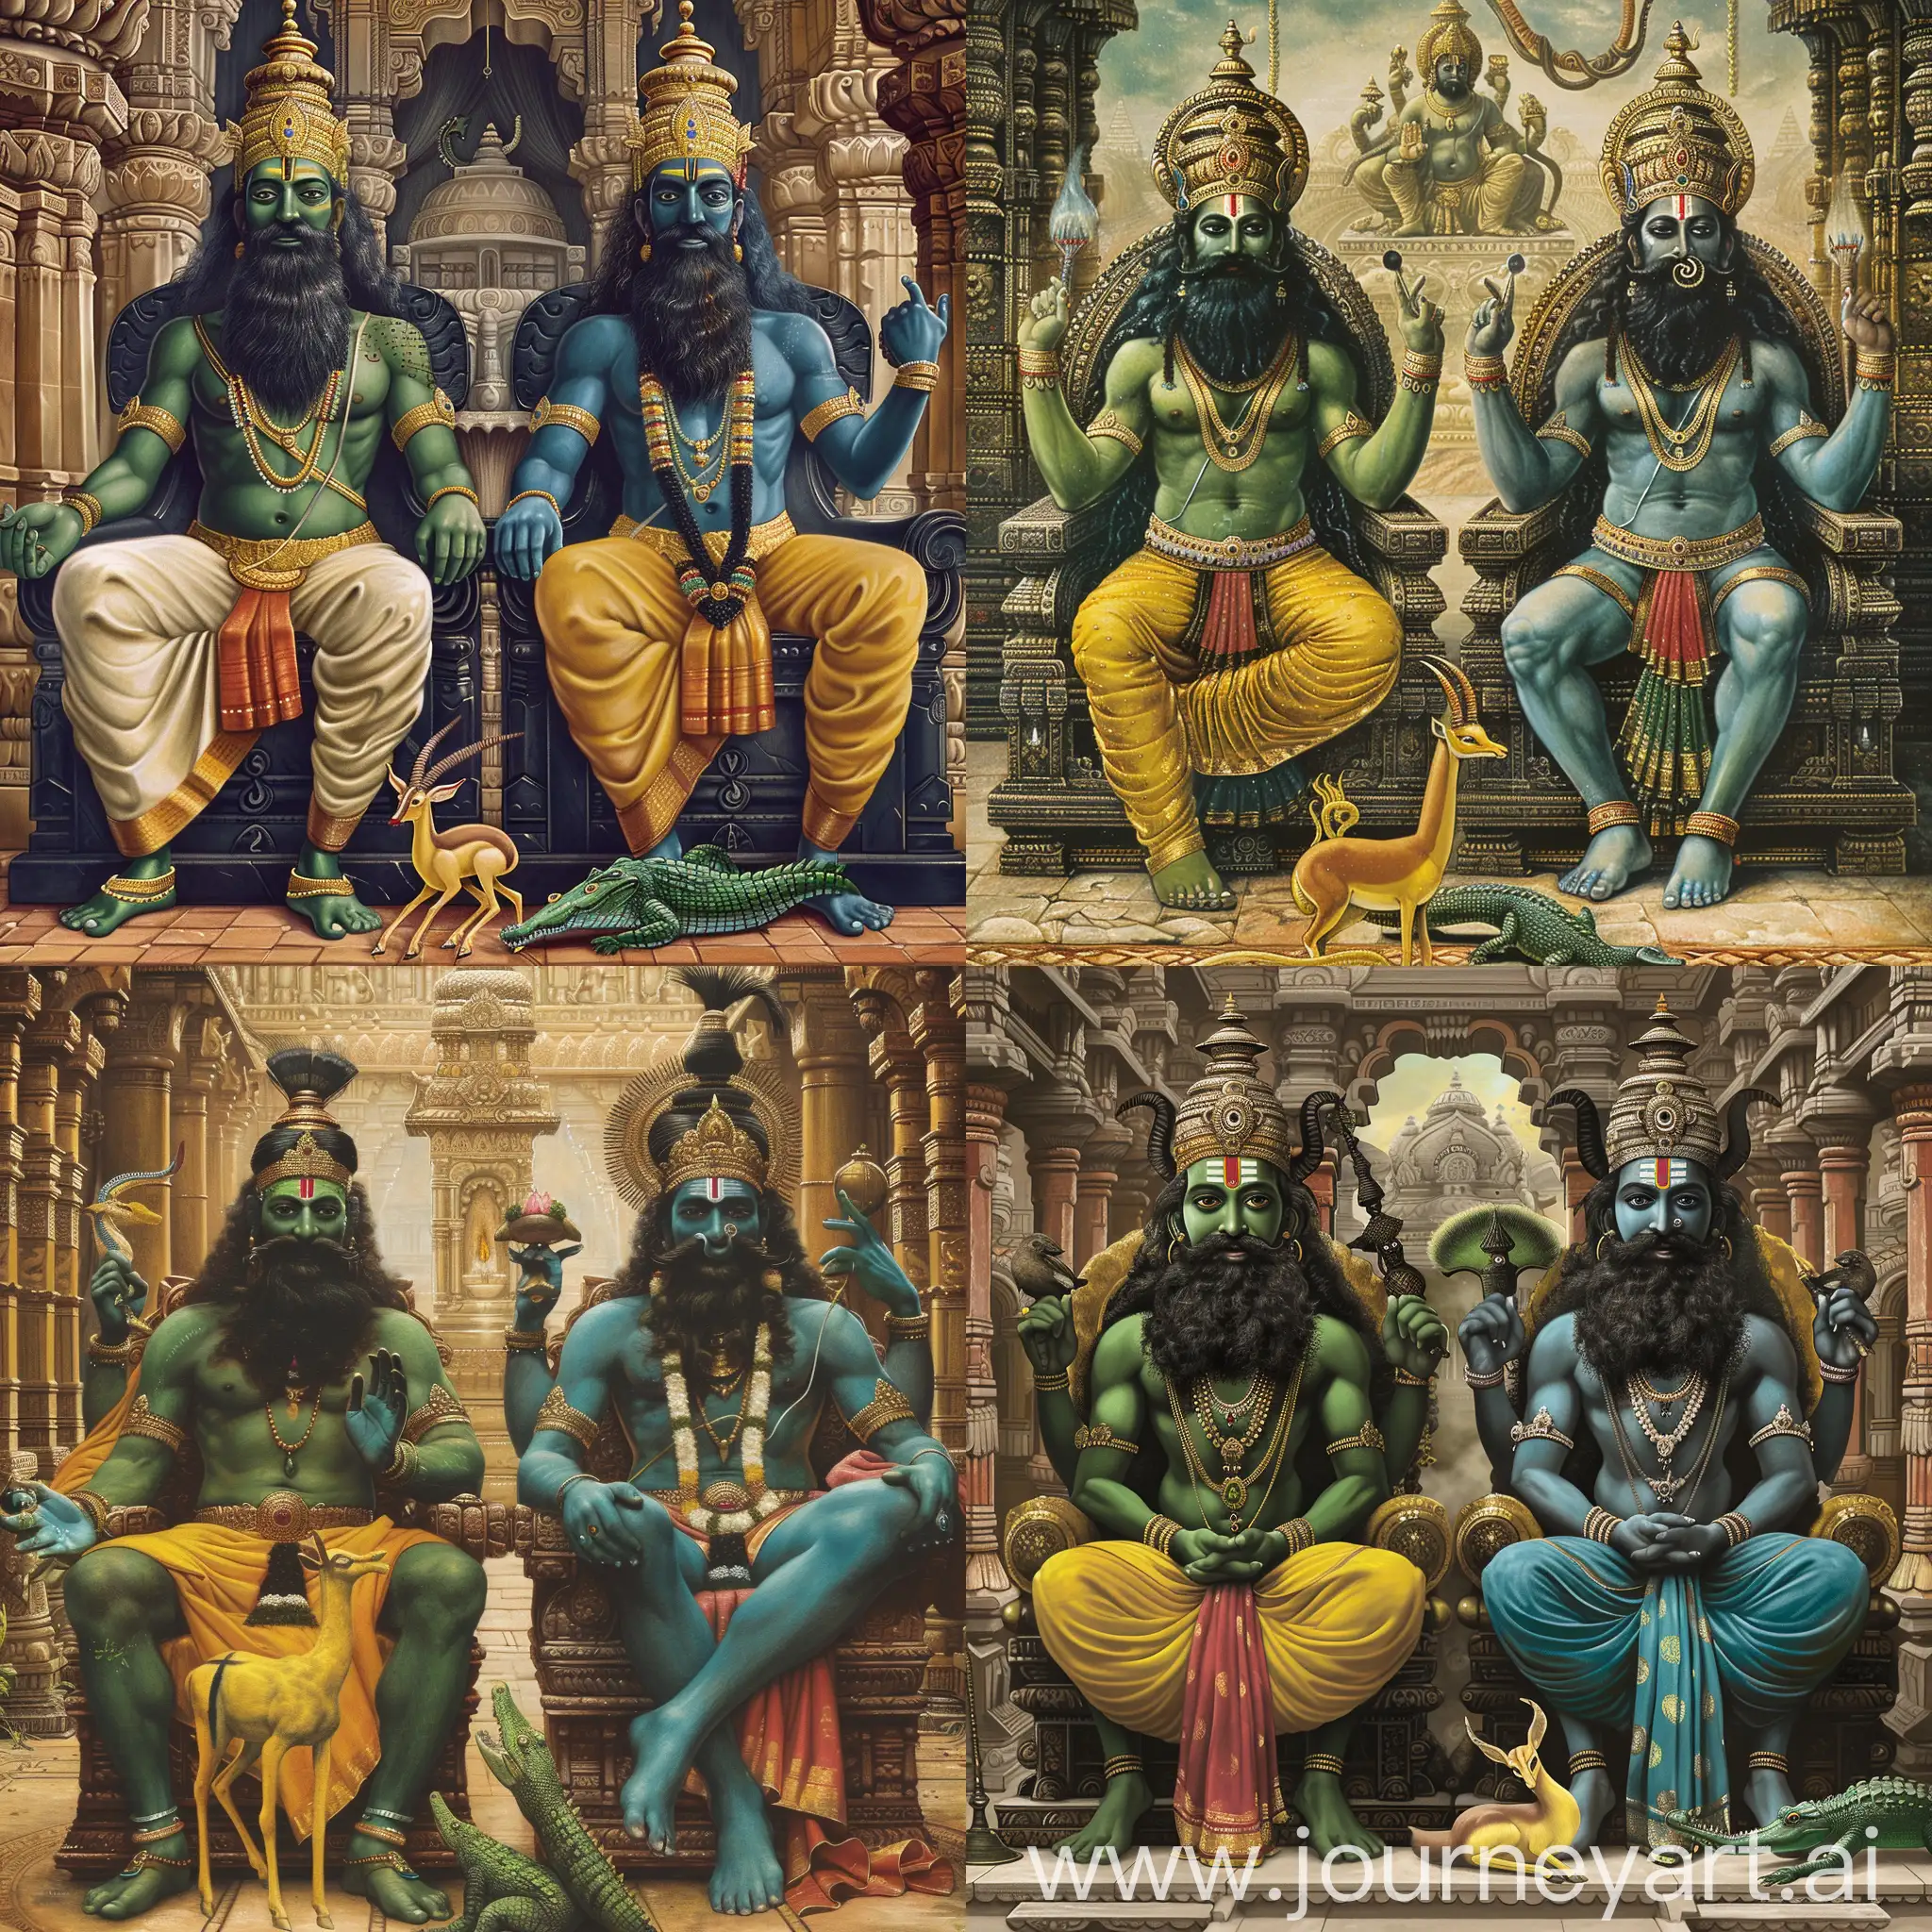 two Hindu gods with black beards are sitting on their thrones,

Vayu is the left one with green skin,

Varuna is the right one with blue skin,

a small yellow gazelle and a small deep green crocodile are before the two gods,

they are all inside a splendid Hindu temple,